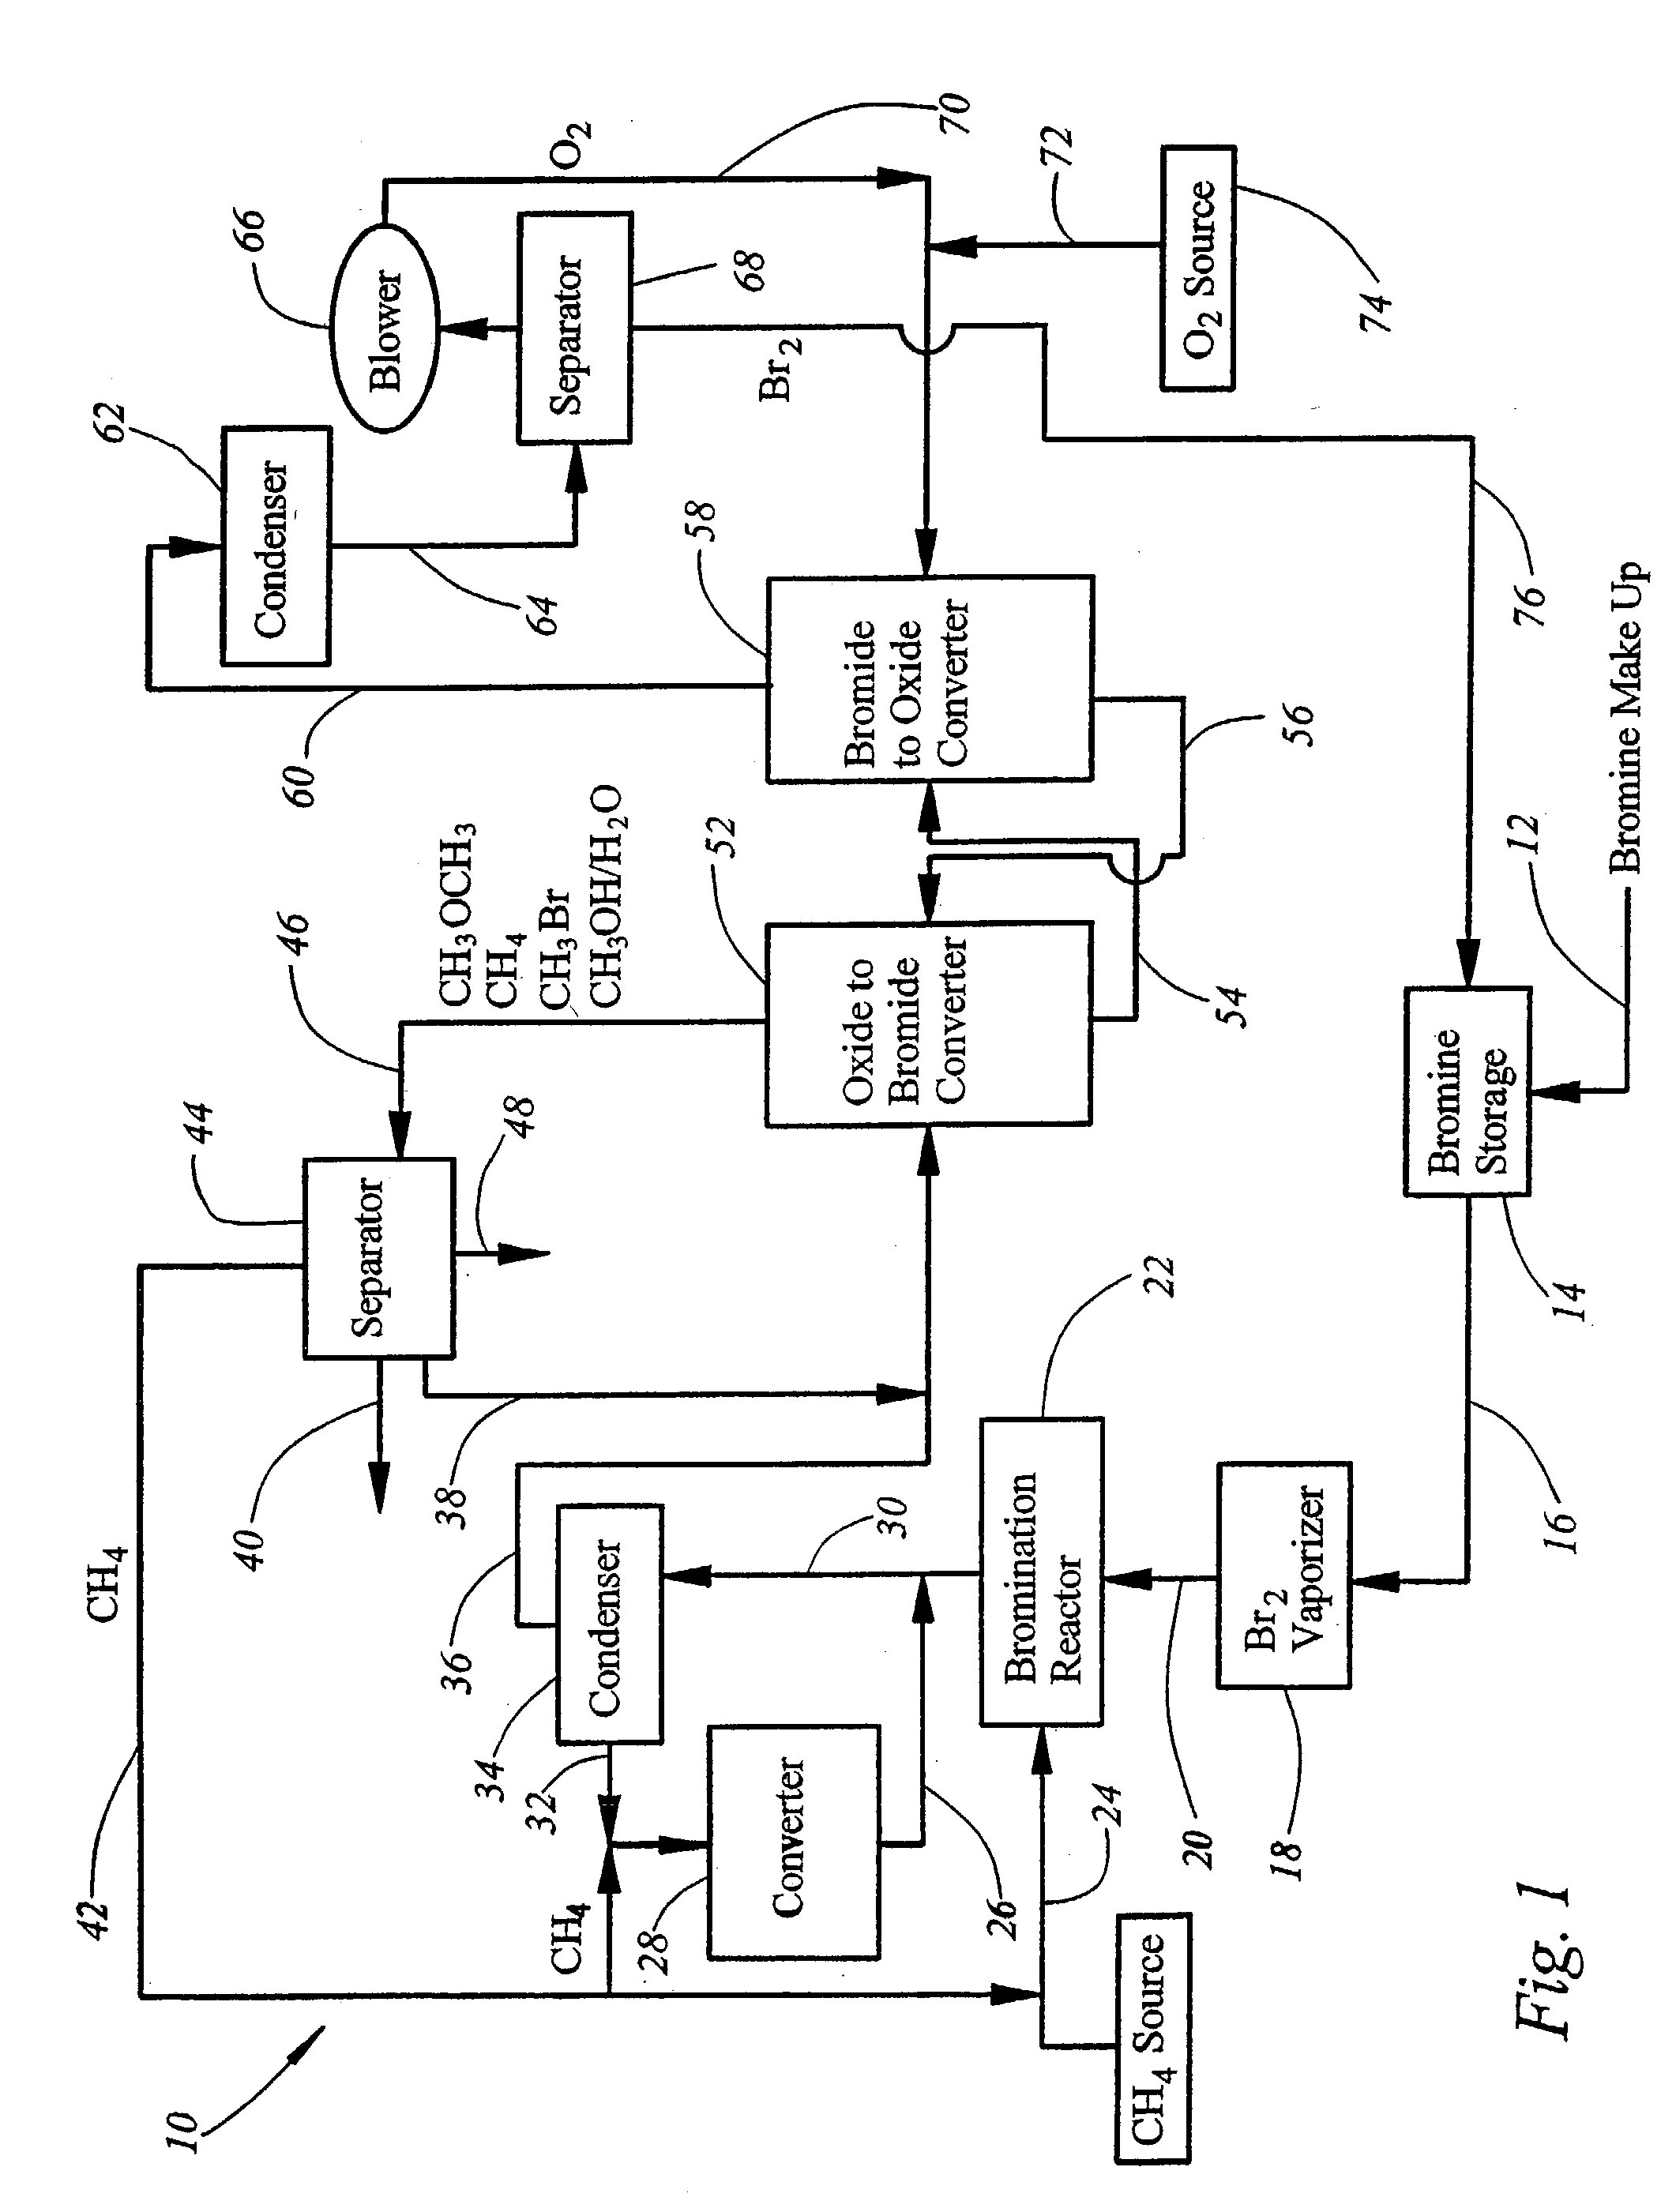 Integrated process for synthesizing alcohols, ethers, aldehydes, and olefins from alkanes